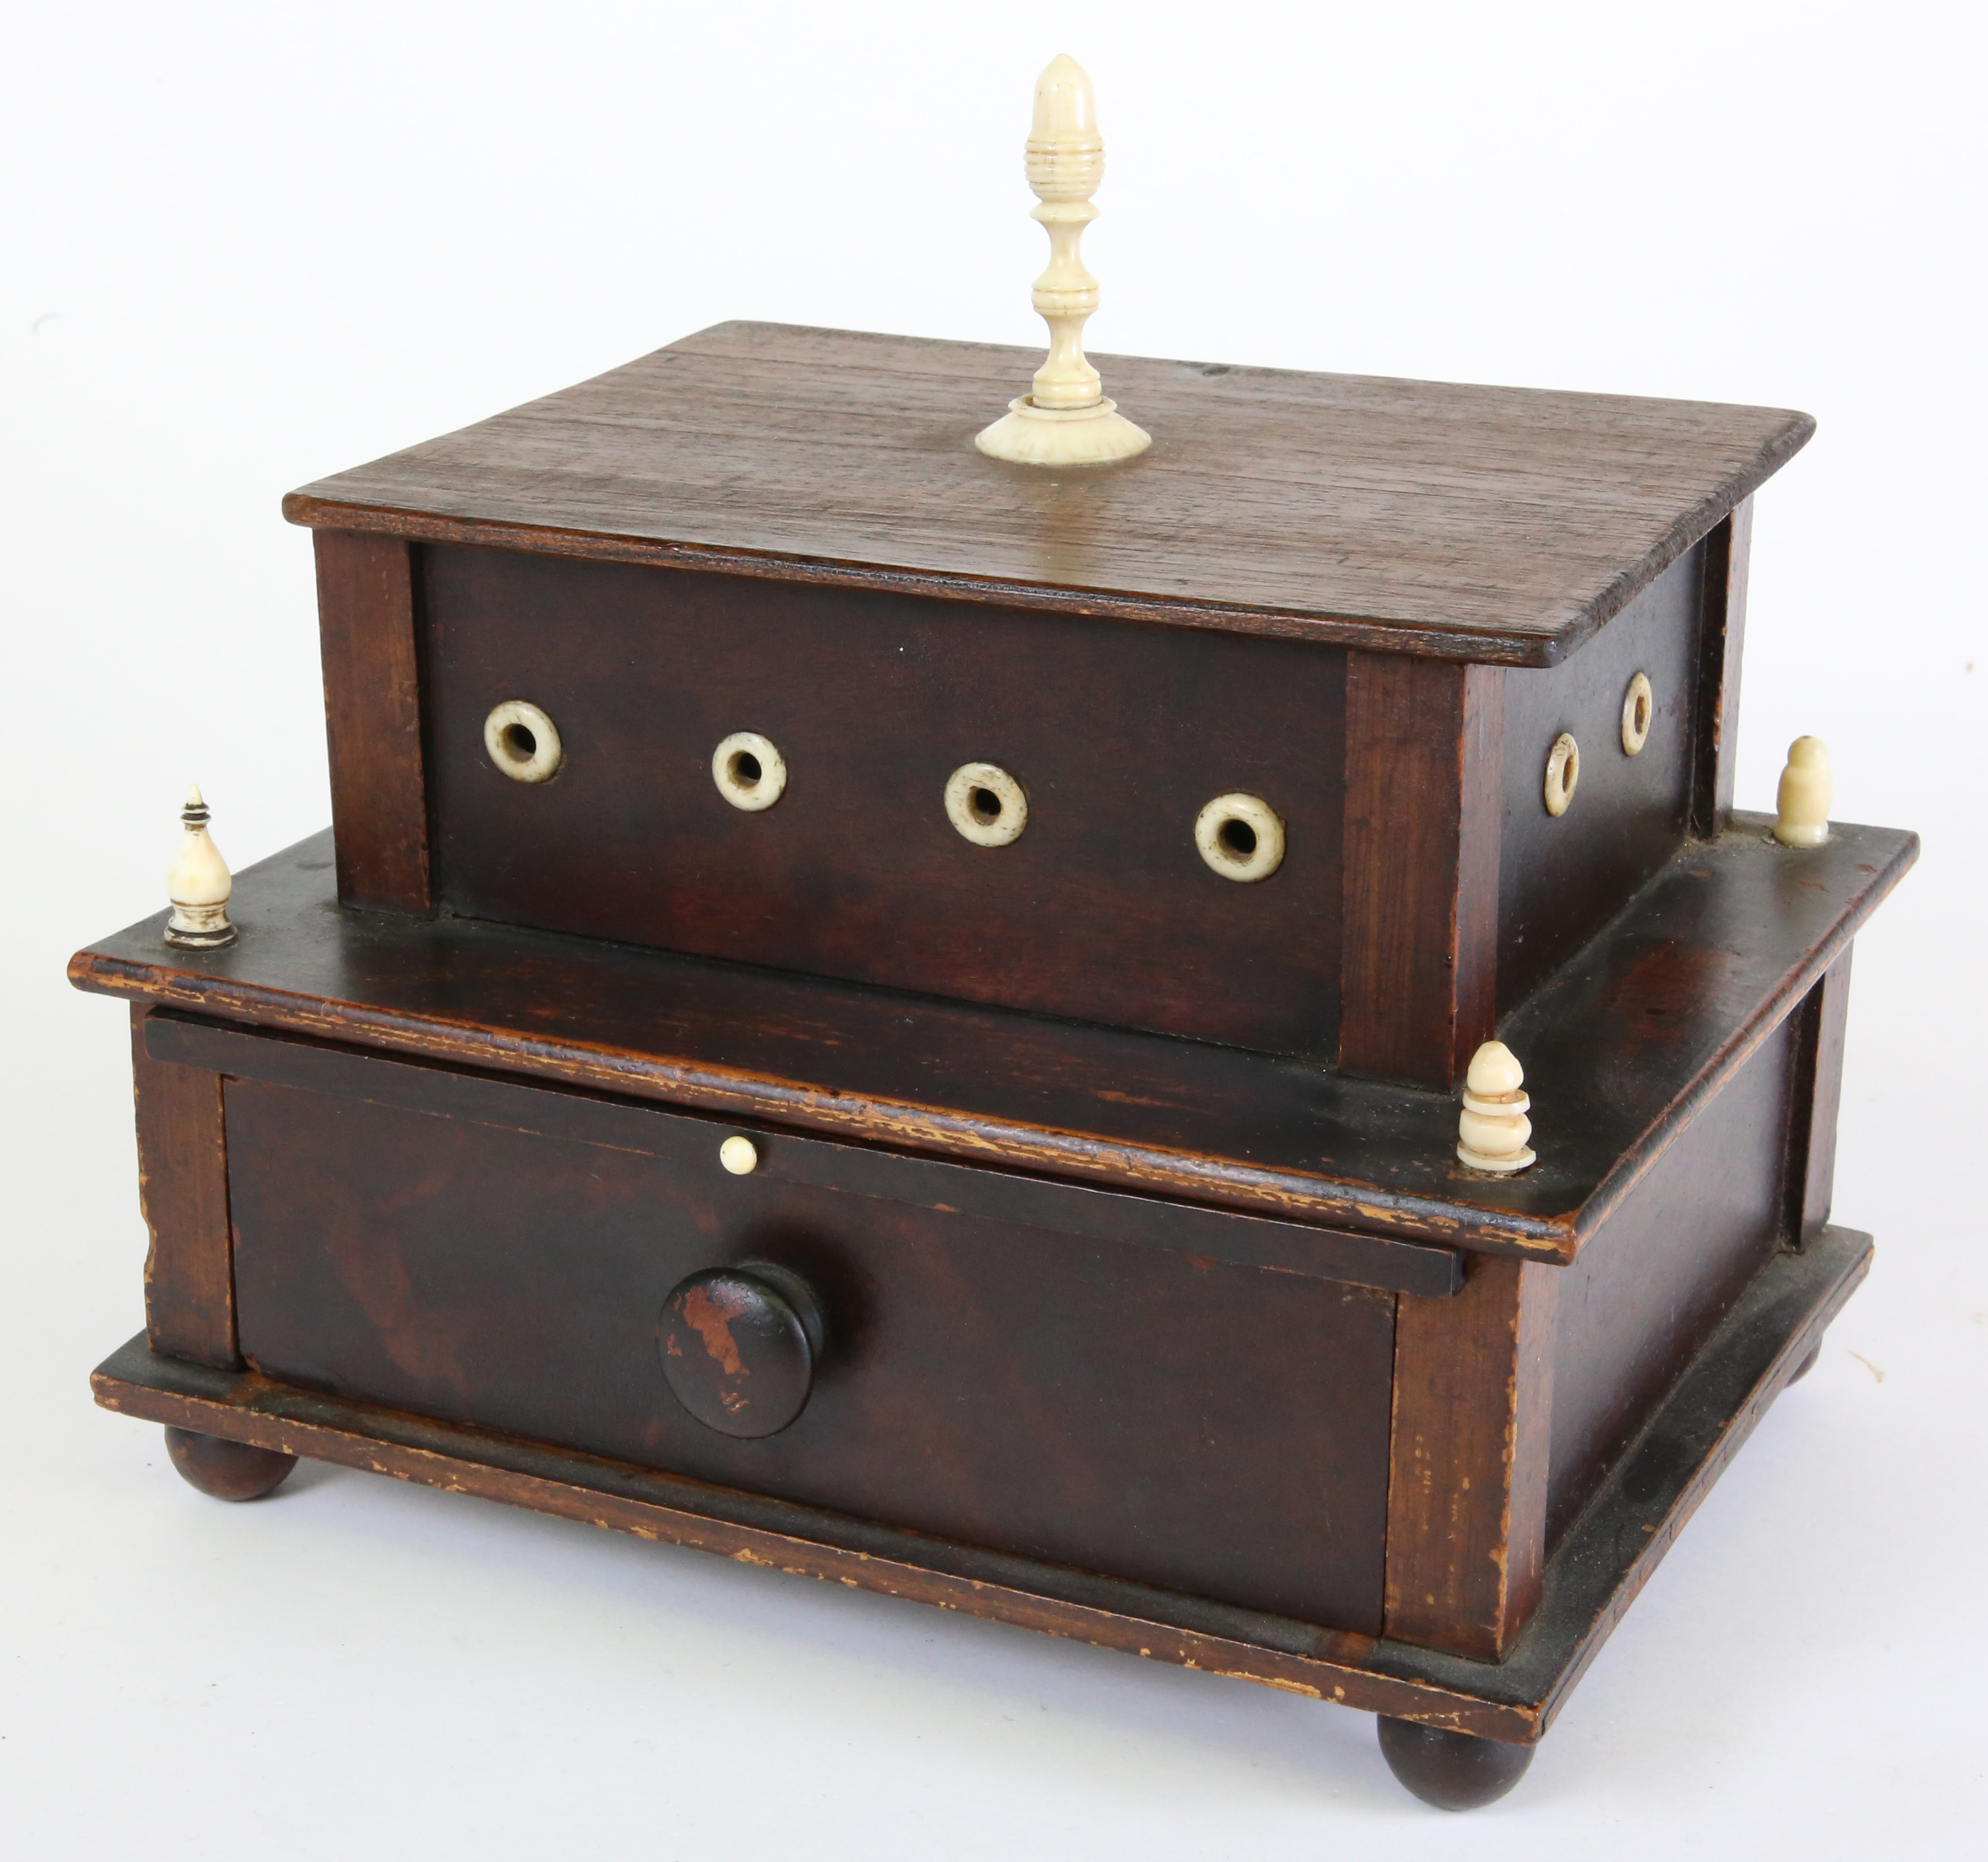 Whaleman Made Sewing Box, 19th Century